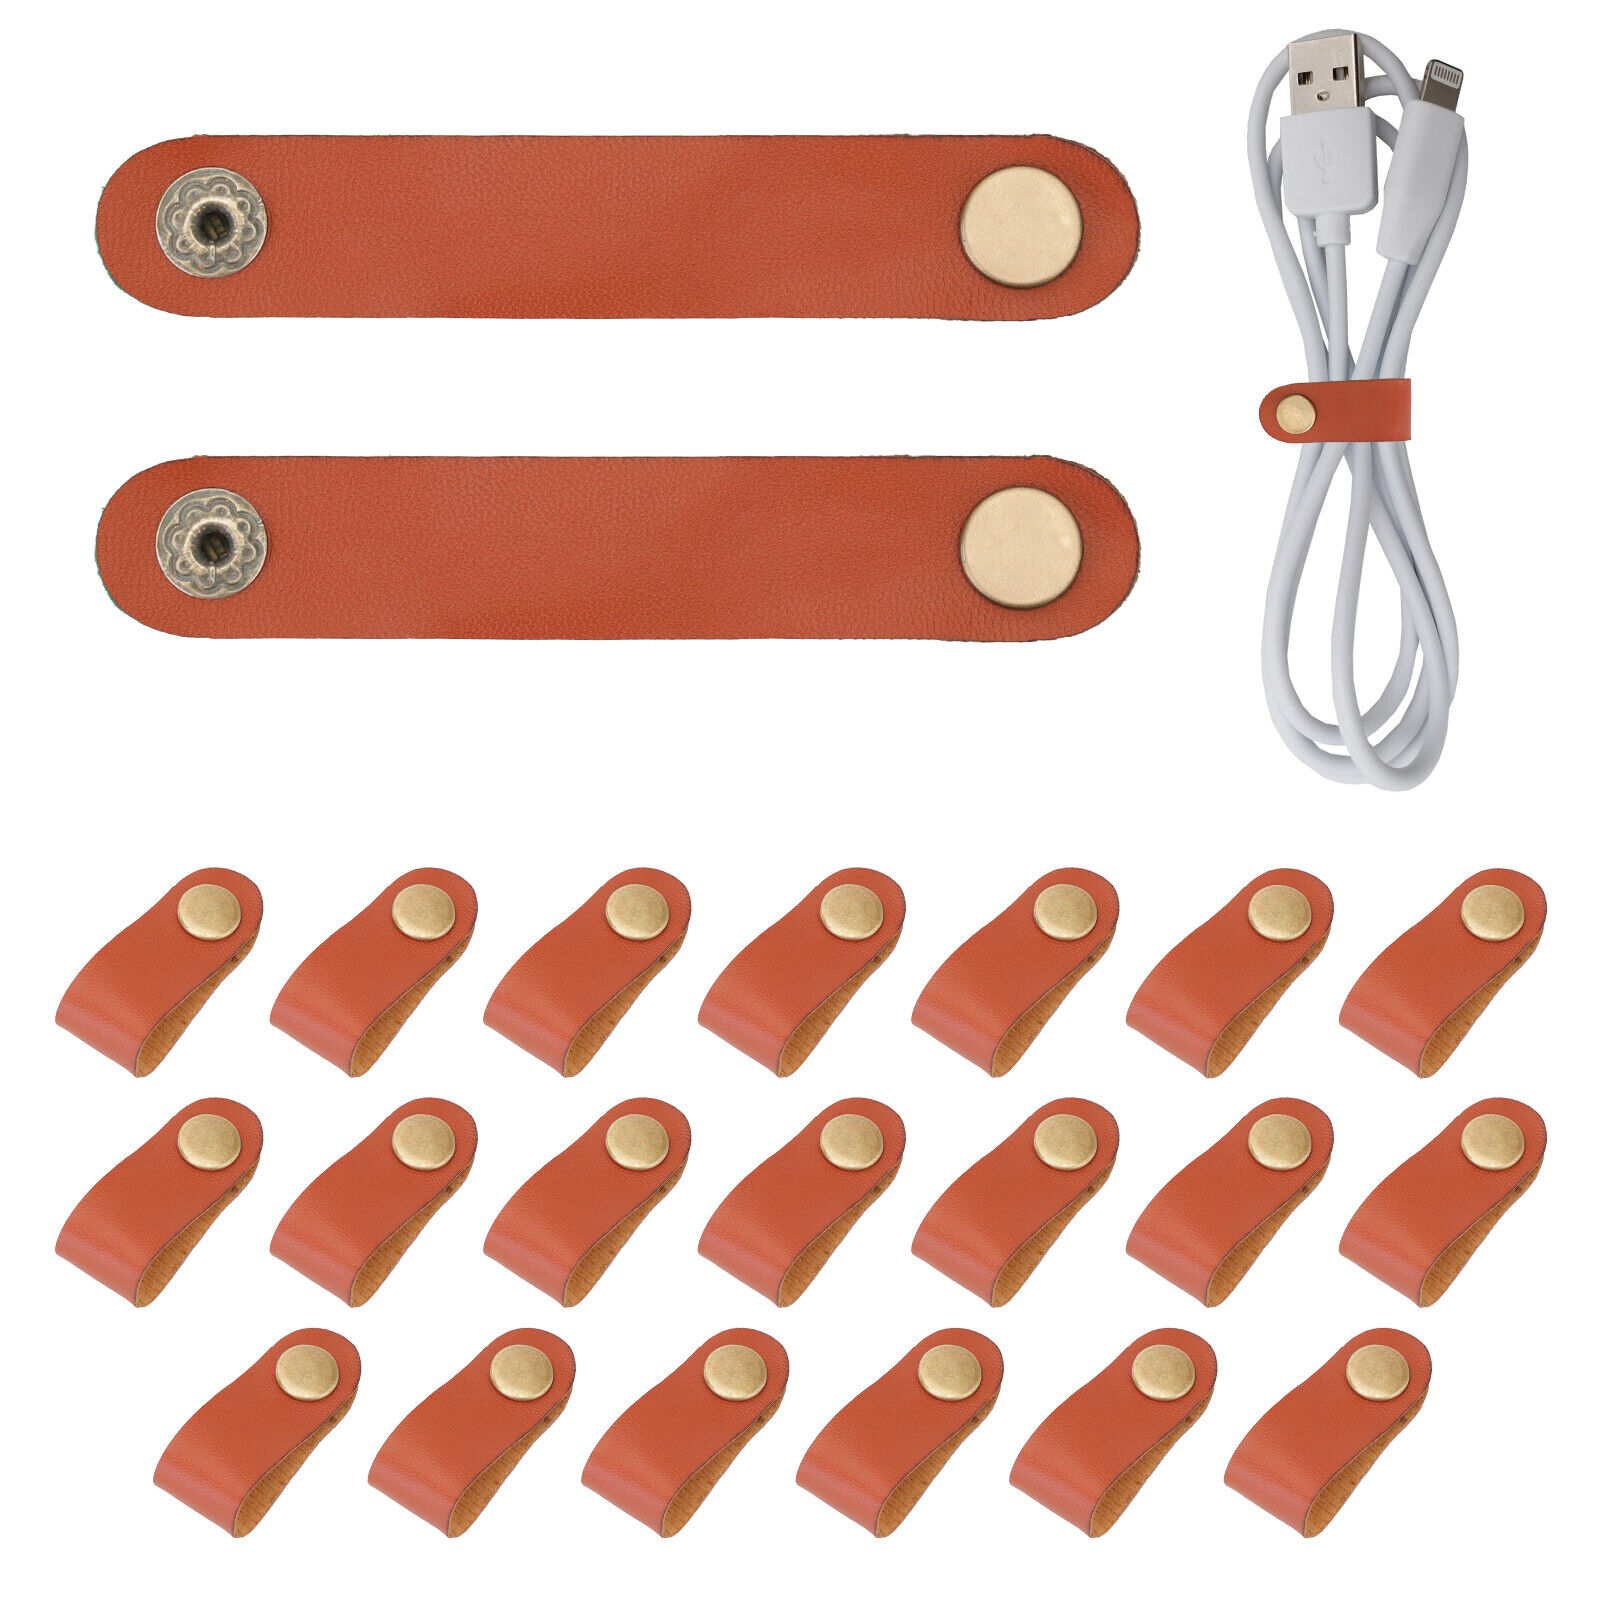 20Pcs Cable Clips Leather Cable Organizer USB Holder Wire Organizer Cord Keeper